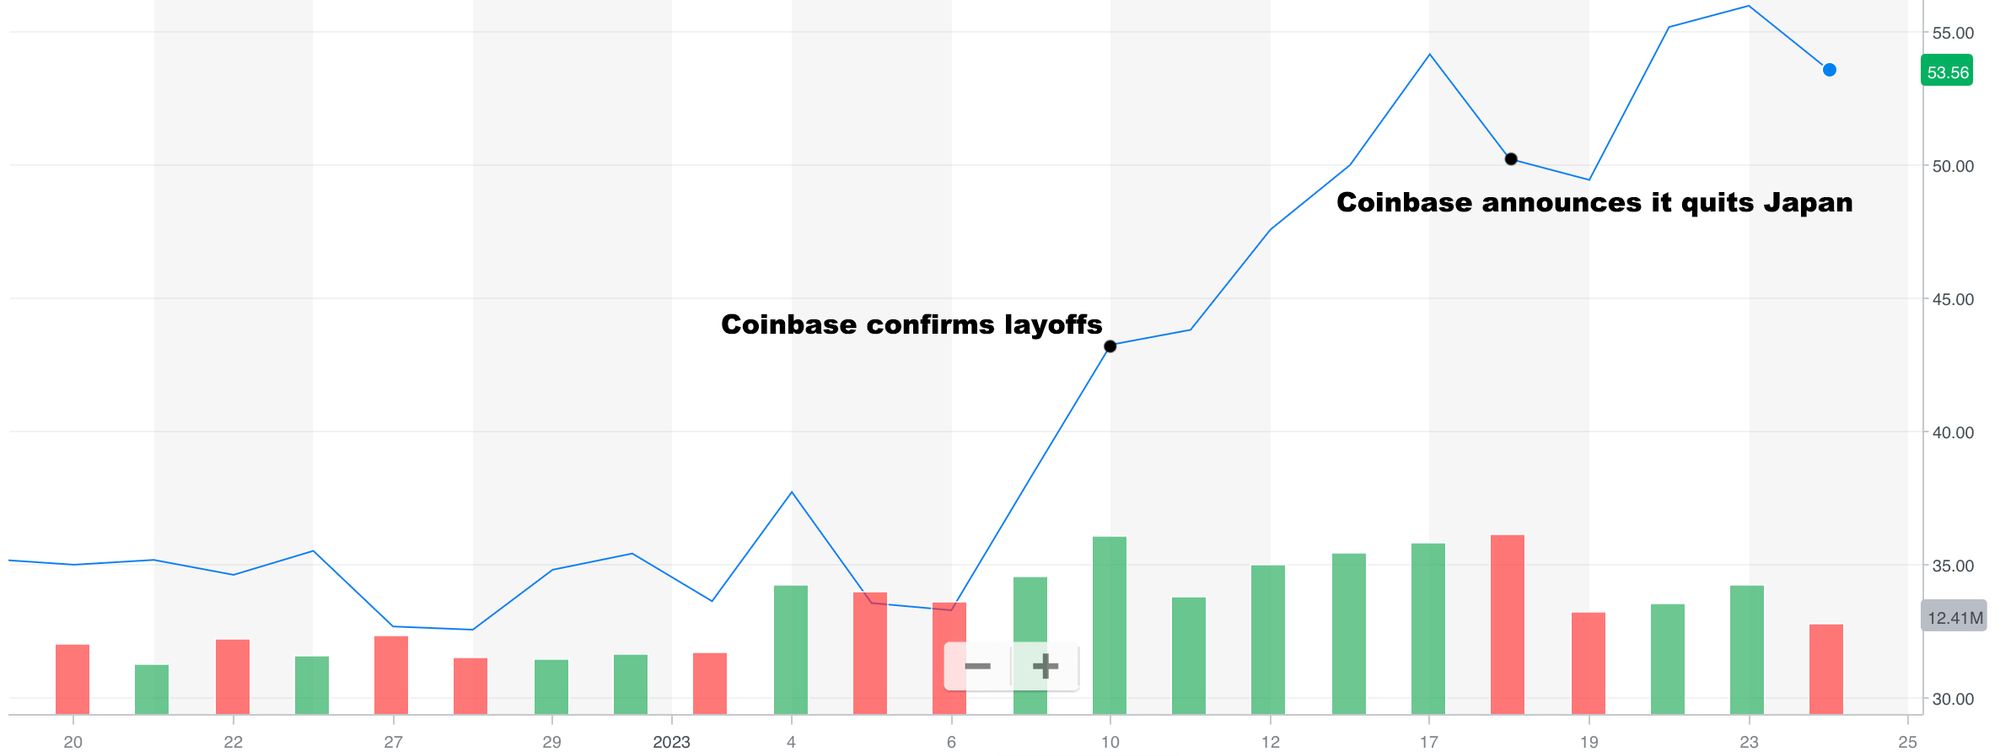 Coinbase stock chart with marked events (confirmation of layoffs and the announcement about Japan)